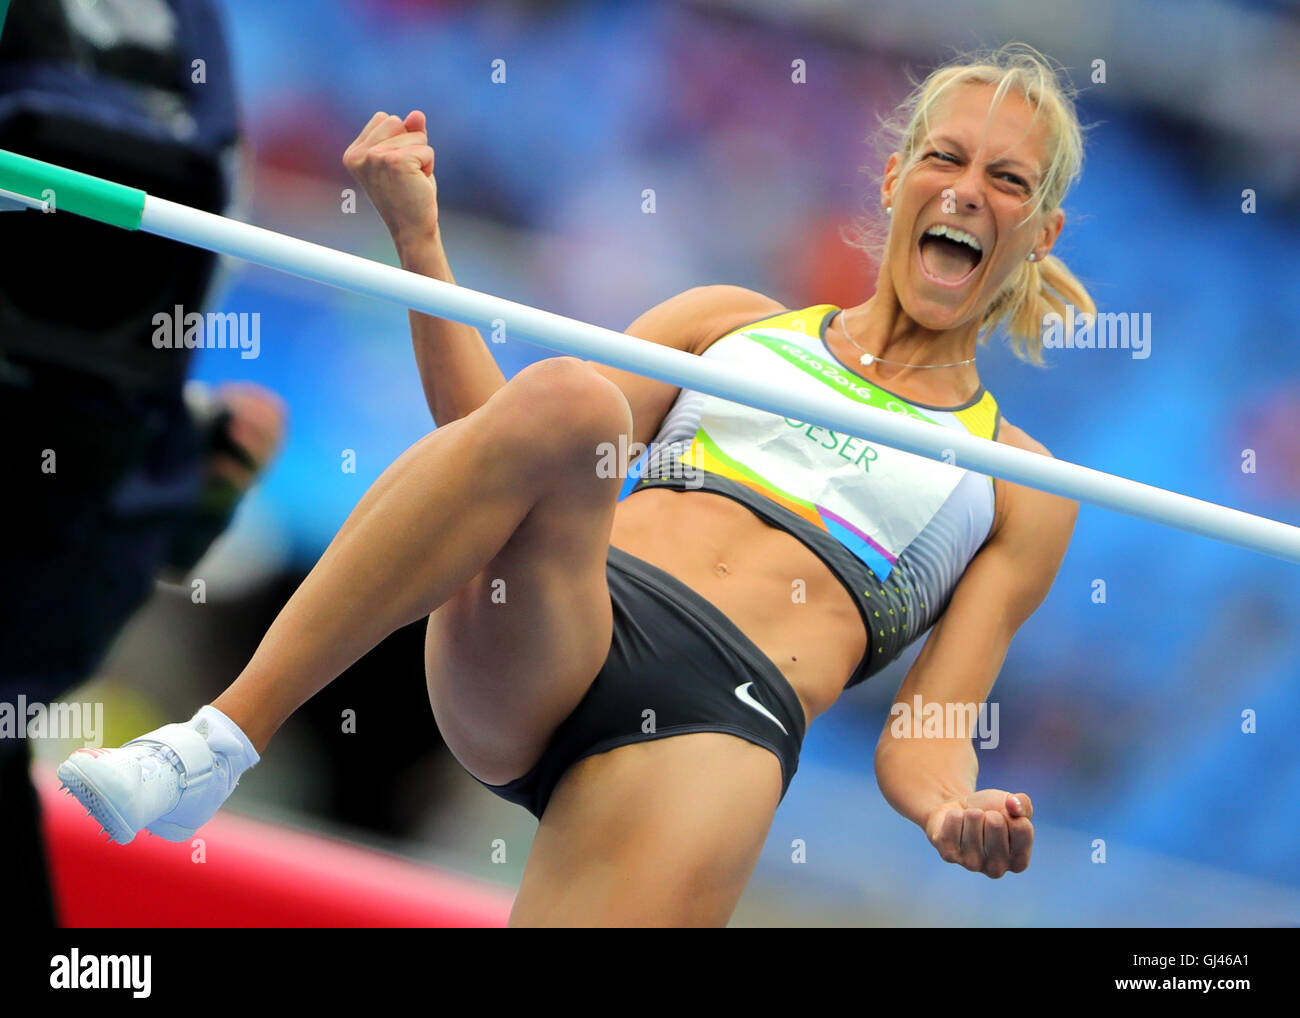 Rio de Janeiro, Brazil. 12th Aug, 2016. Jennifer Oeser of Germany competes in High Jump of Women's Heptathlon of the Athletic, Track and Field events during the Rio 2016 Olympic Games at Olympic Stadium in Rio de Janeiro, Brazil, 12 August 2016. Photo: Michael Kappeler/dpa/Alamy Live News Stock Photo